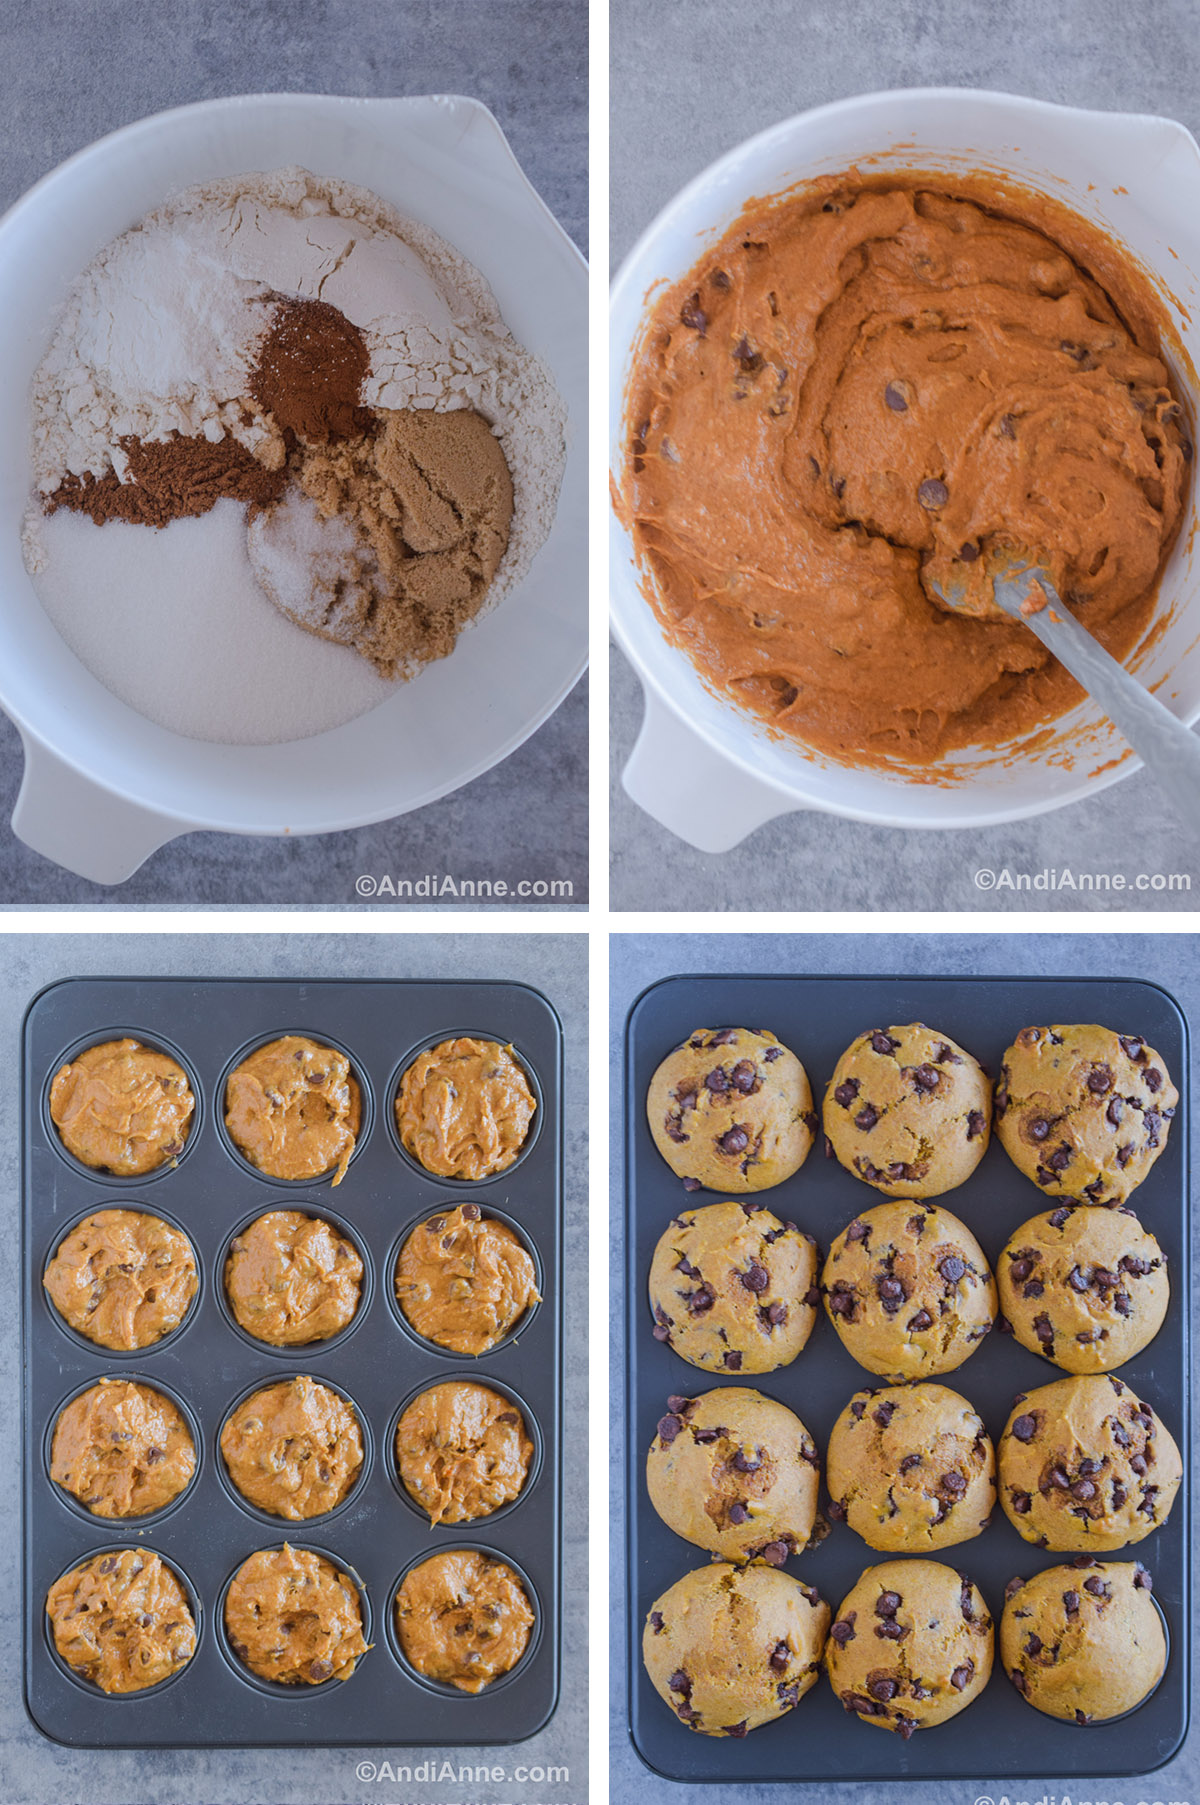 Four images showing steps to make recipe. First is bowl of dry ingredients unmixed. Second is orange batter with chocolate chips in a white bowl with spatula. Third is raw batter divided in a muffin pan. Fourth is baked pumpkin chocolate chip muffins in the muffin pan.